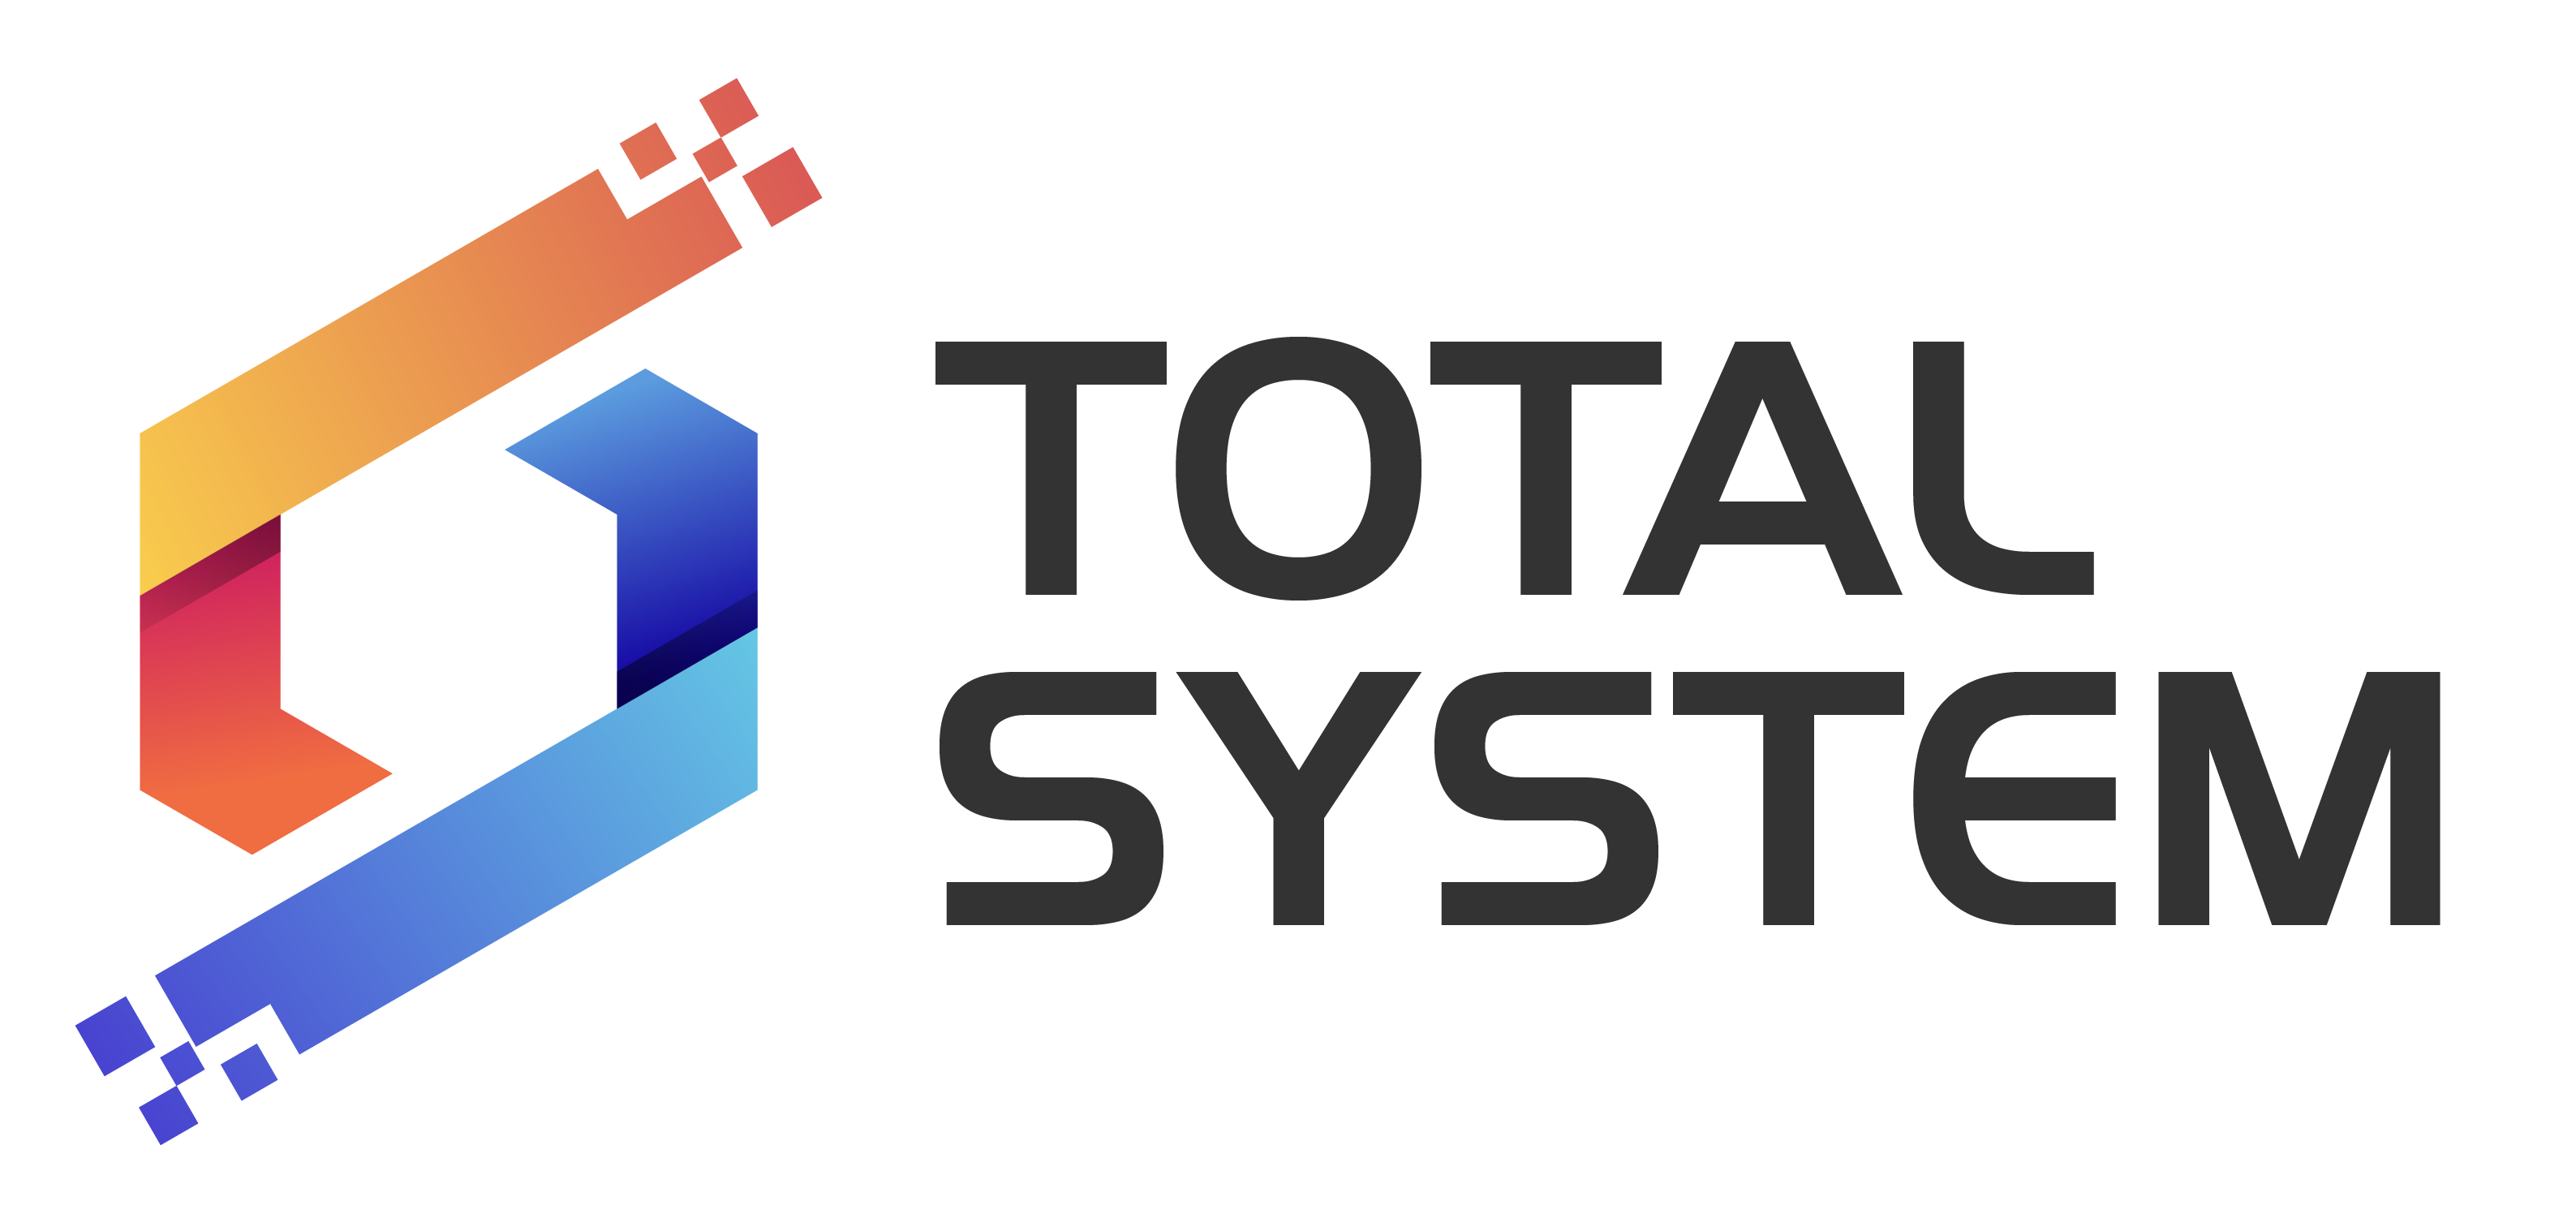 Total System